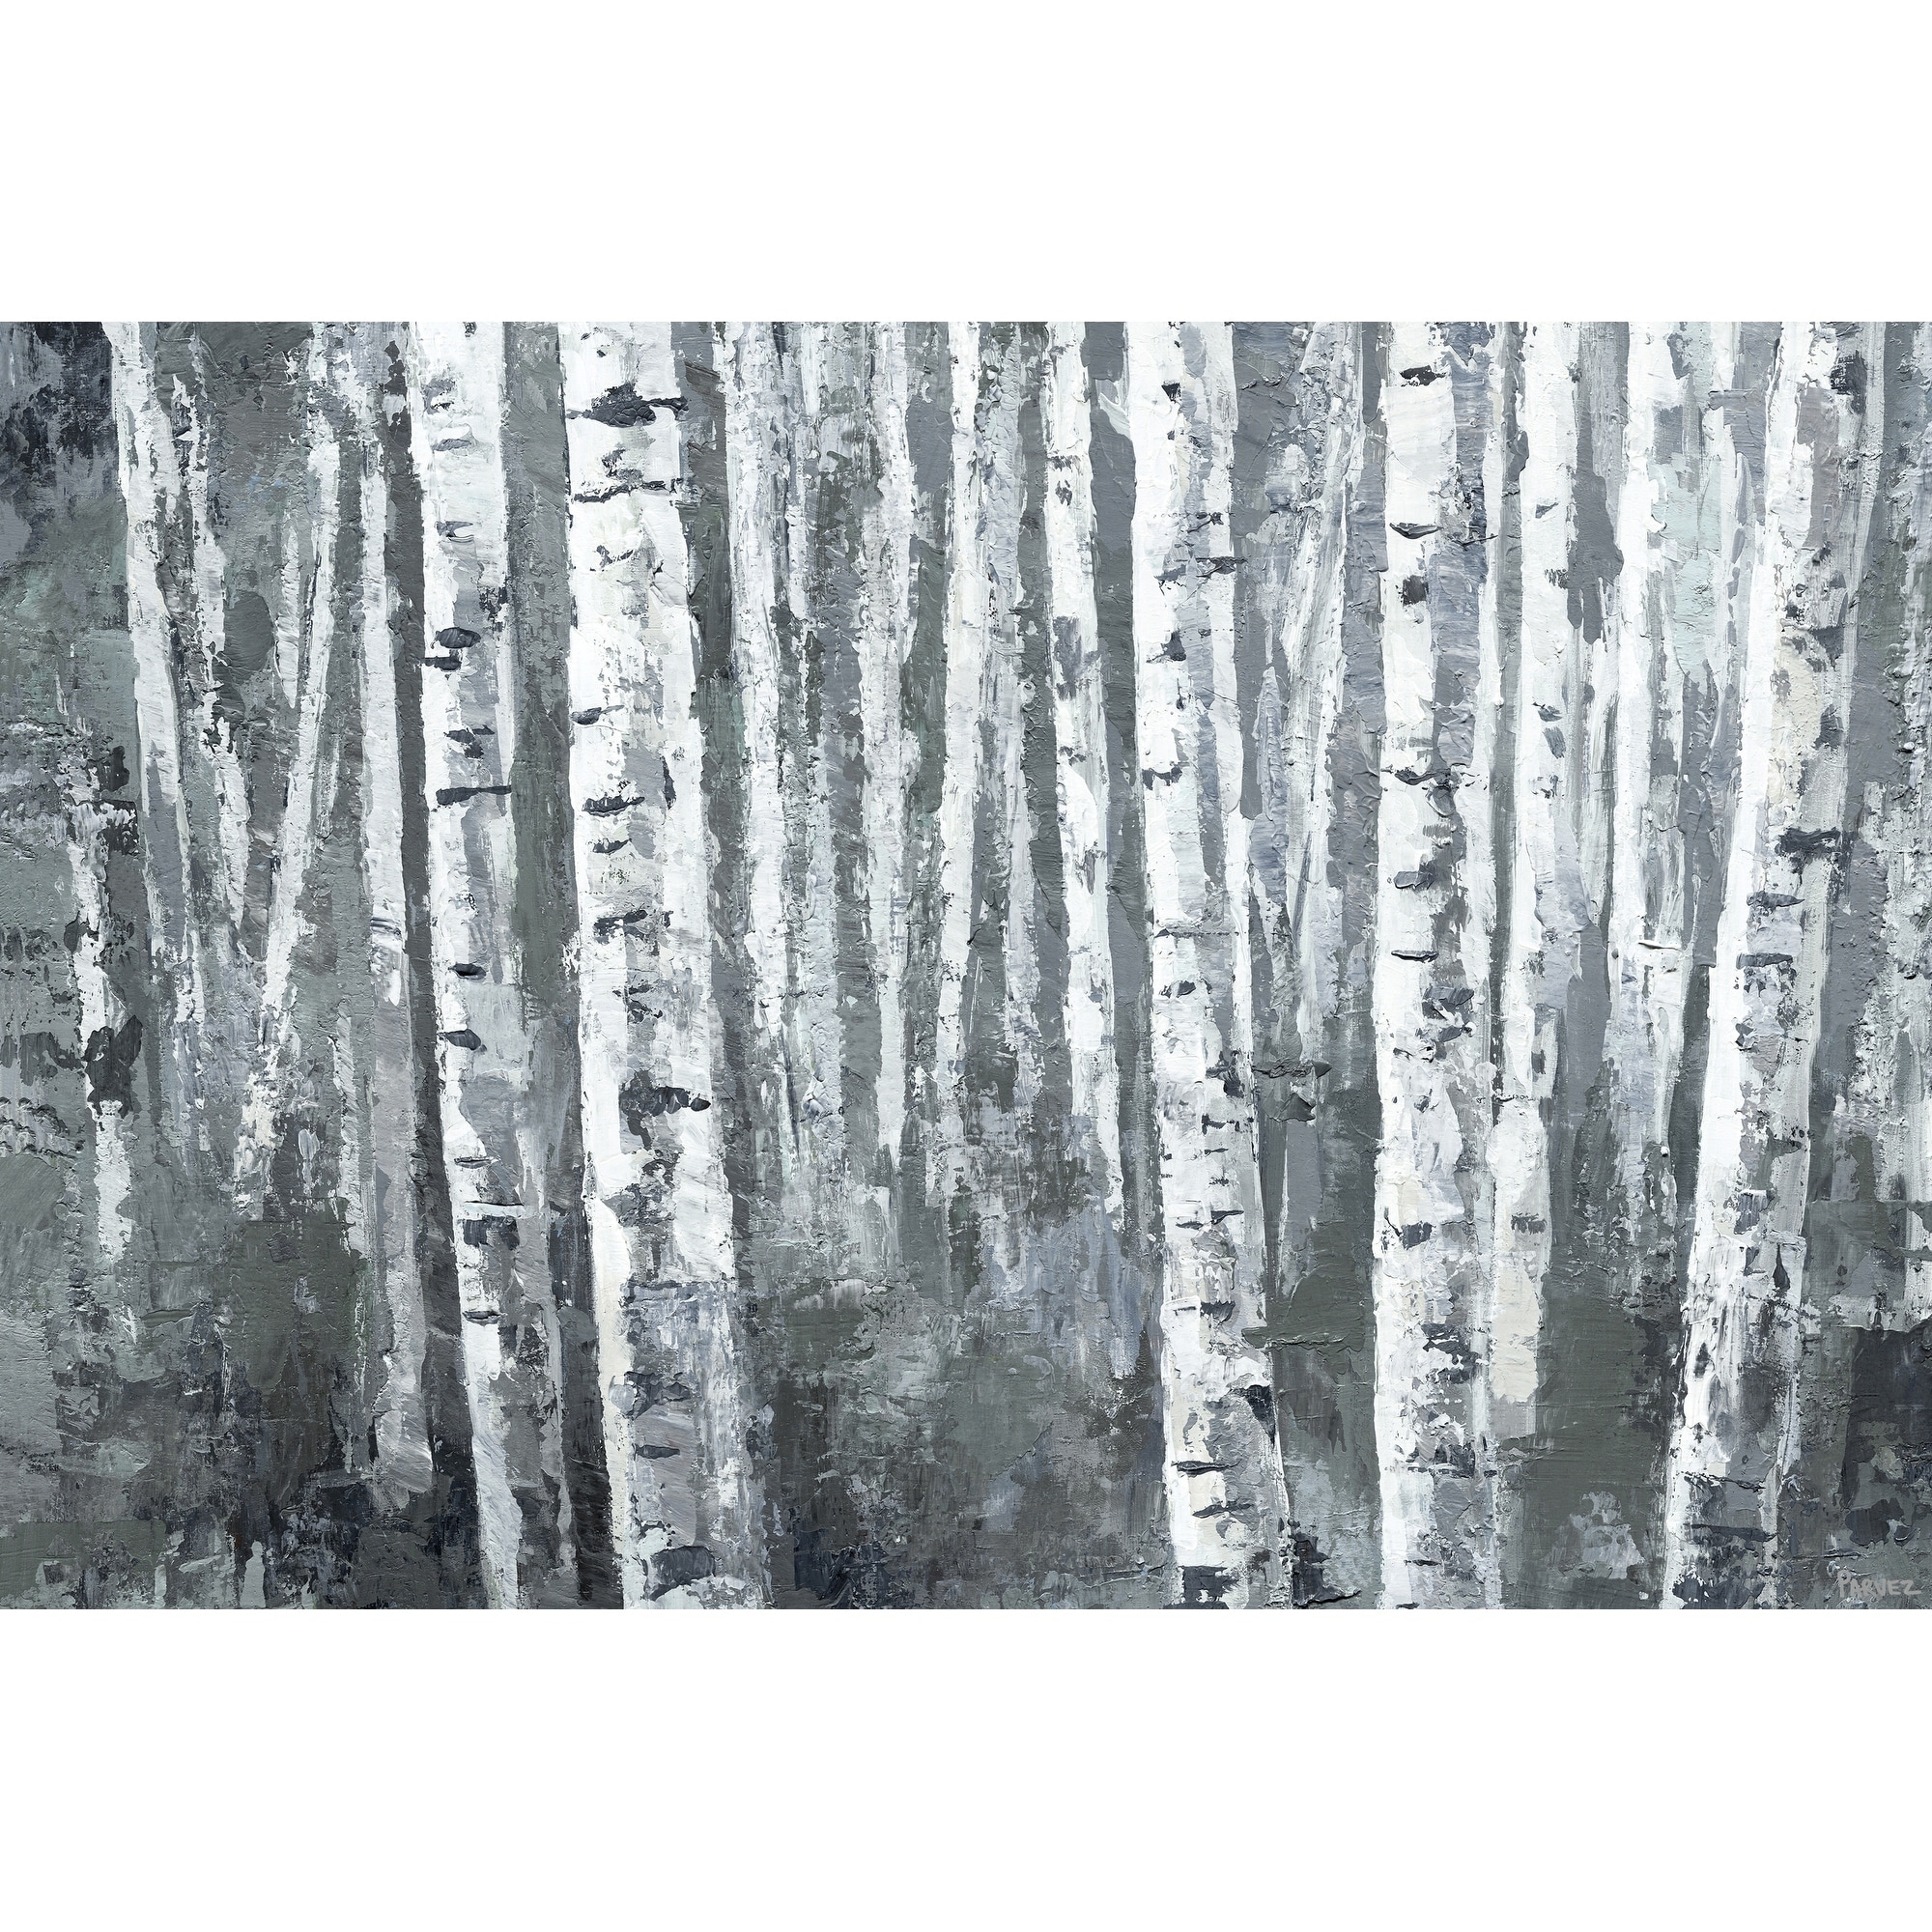 Handmade Dusky Tree Trunk Forest Print on Wrapped Canvas